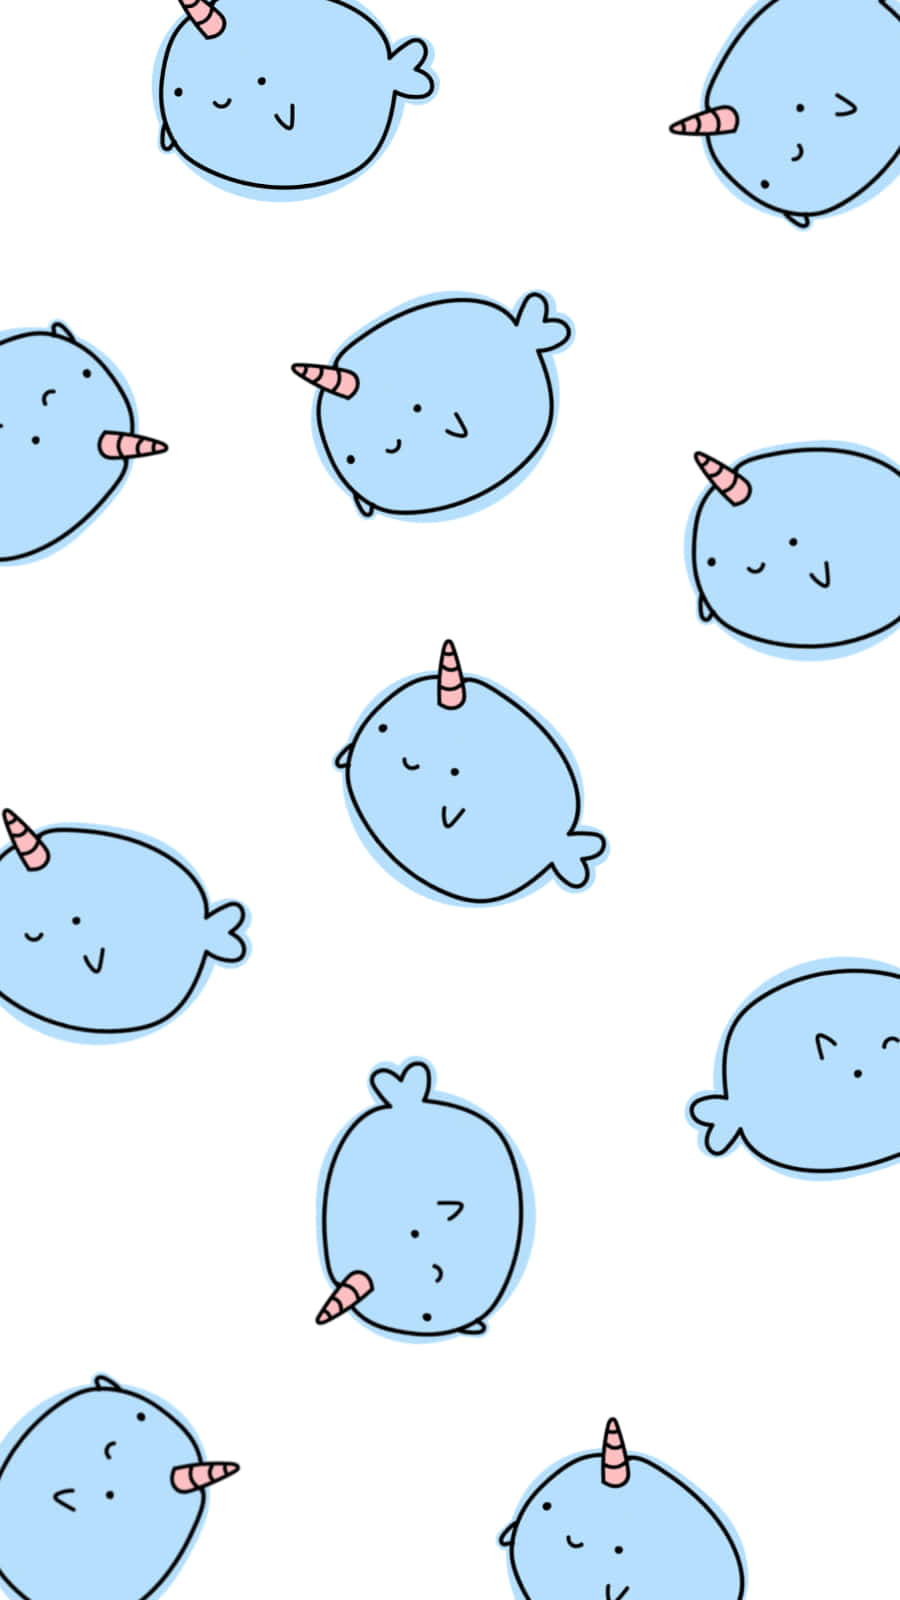 8816 Narwhal Images Stock Photos  Vectors  Shutterstock